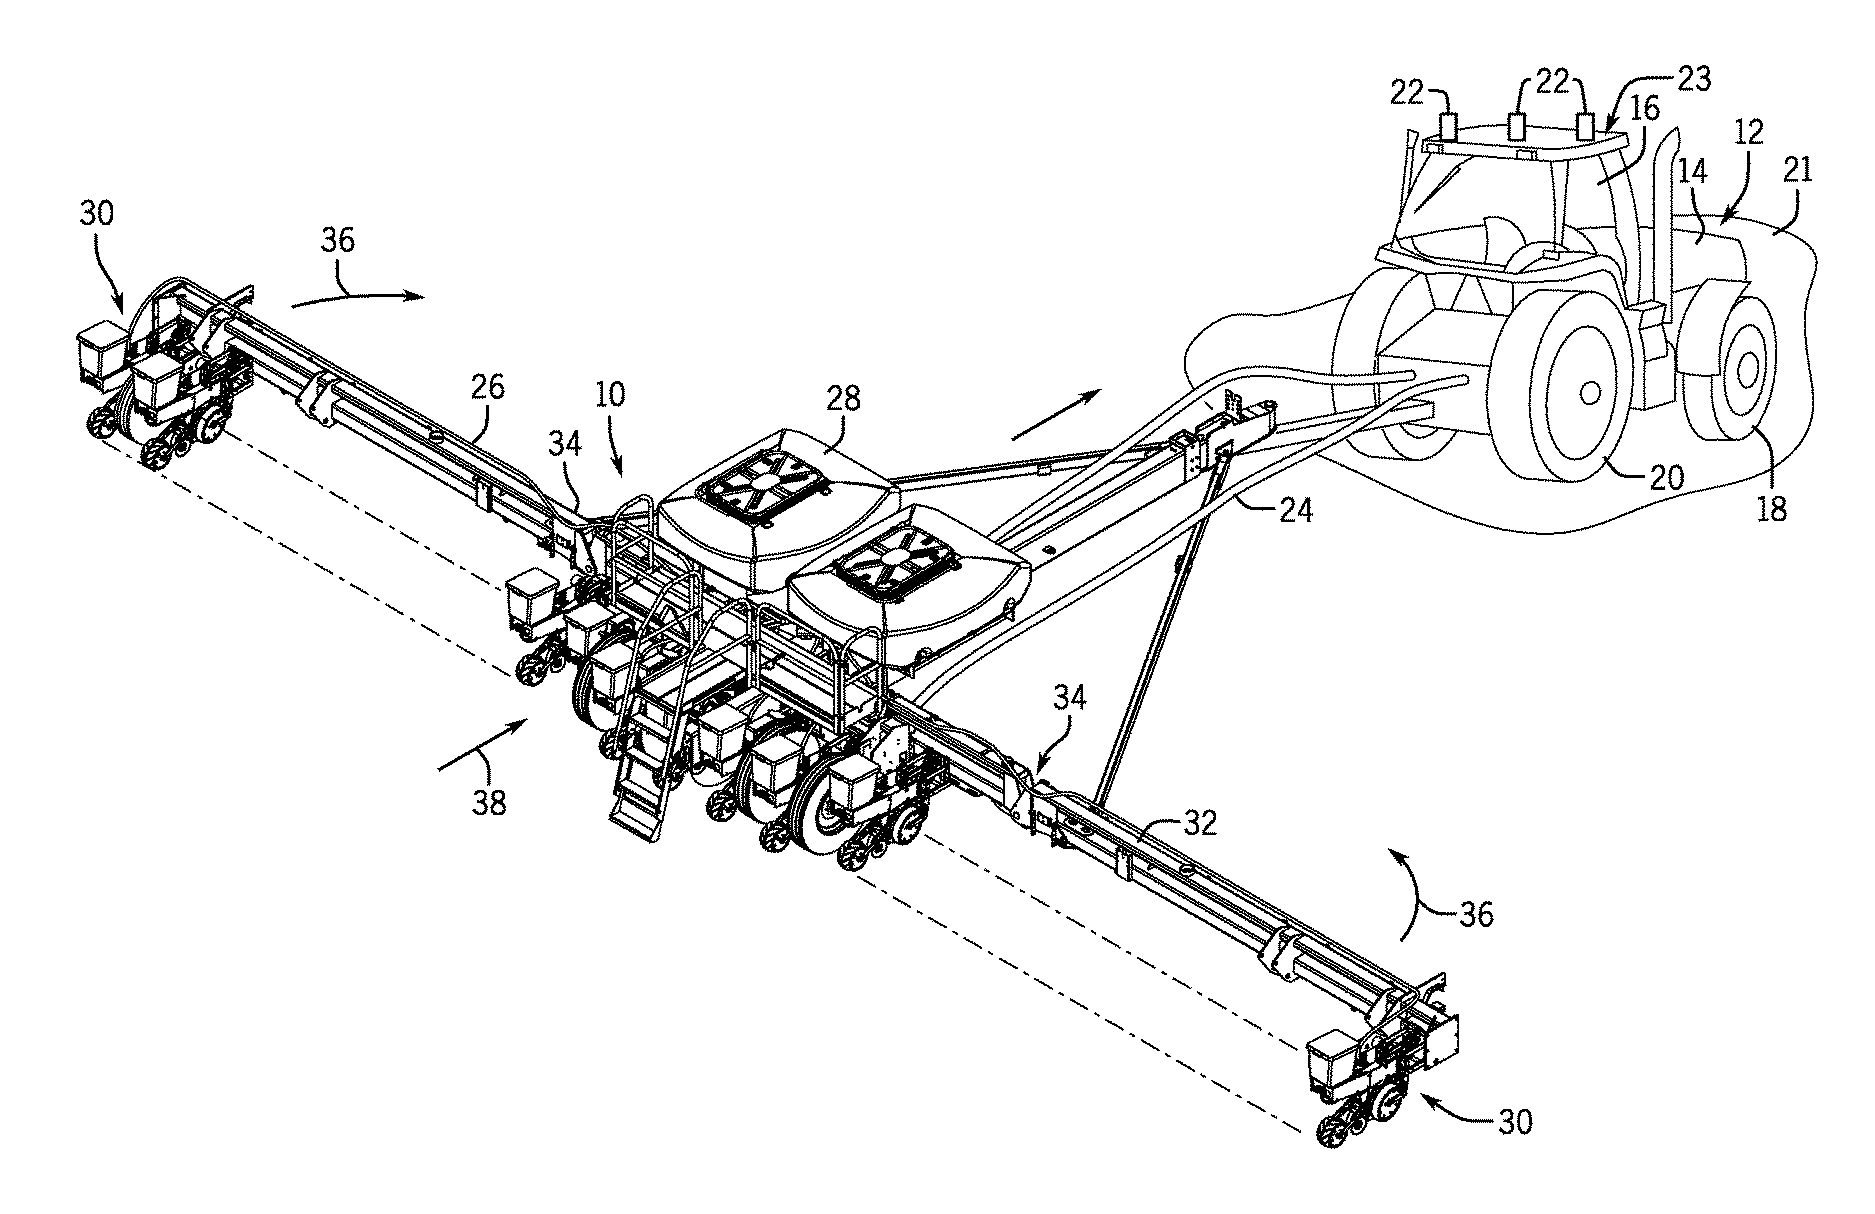 Automation kit for an agricultural vehicle